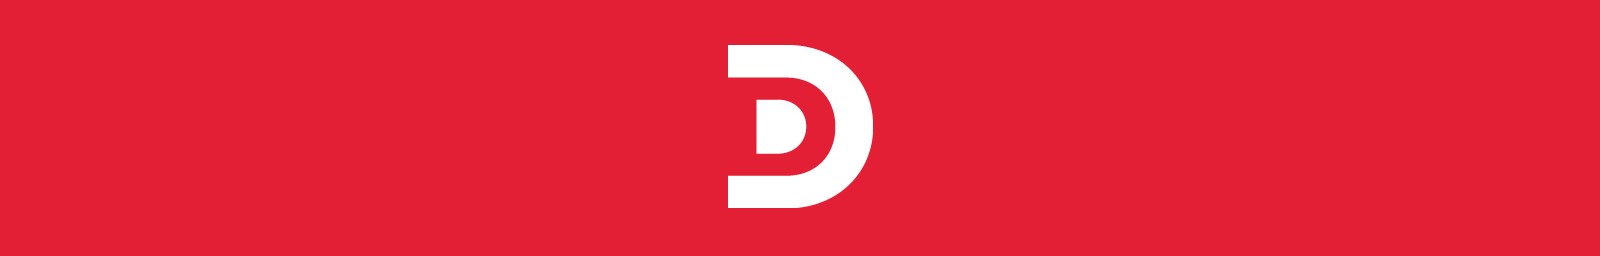 Driskell Center logo on red background